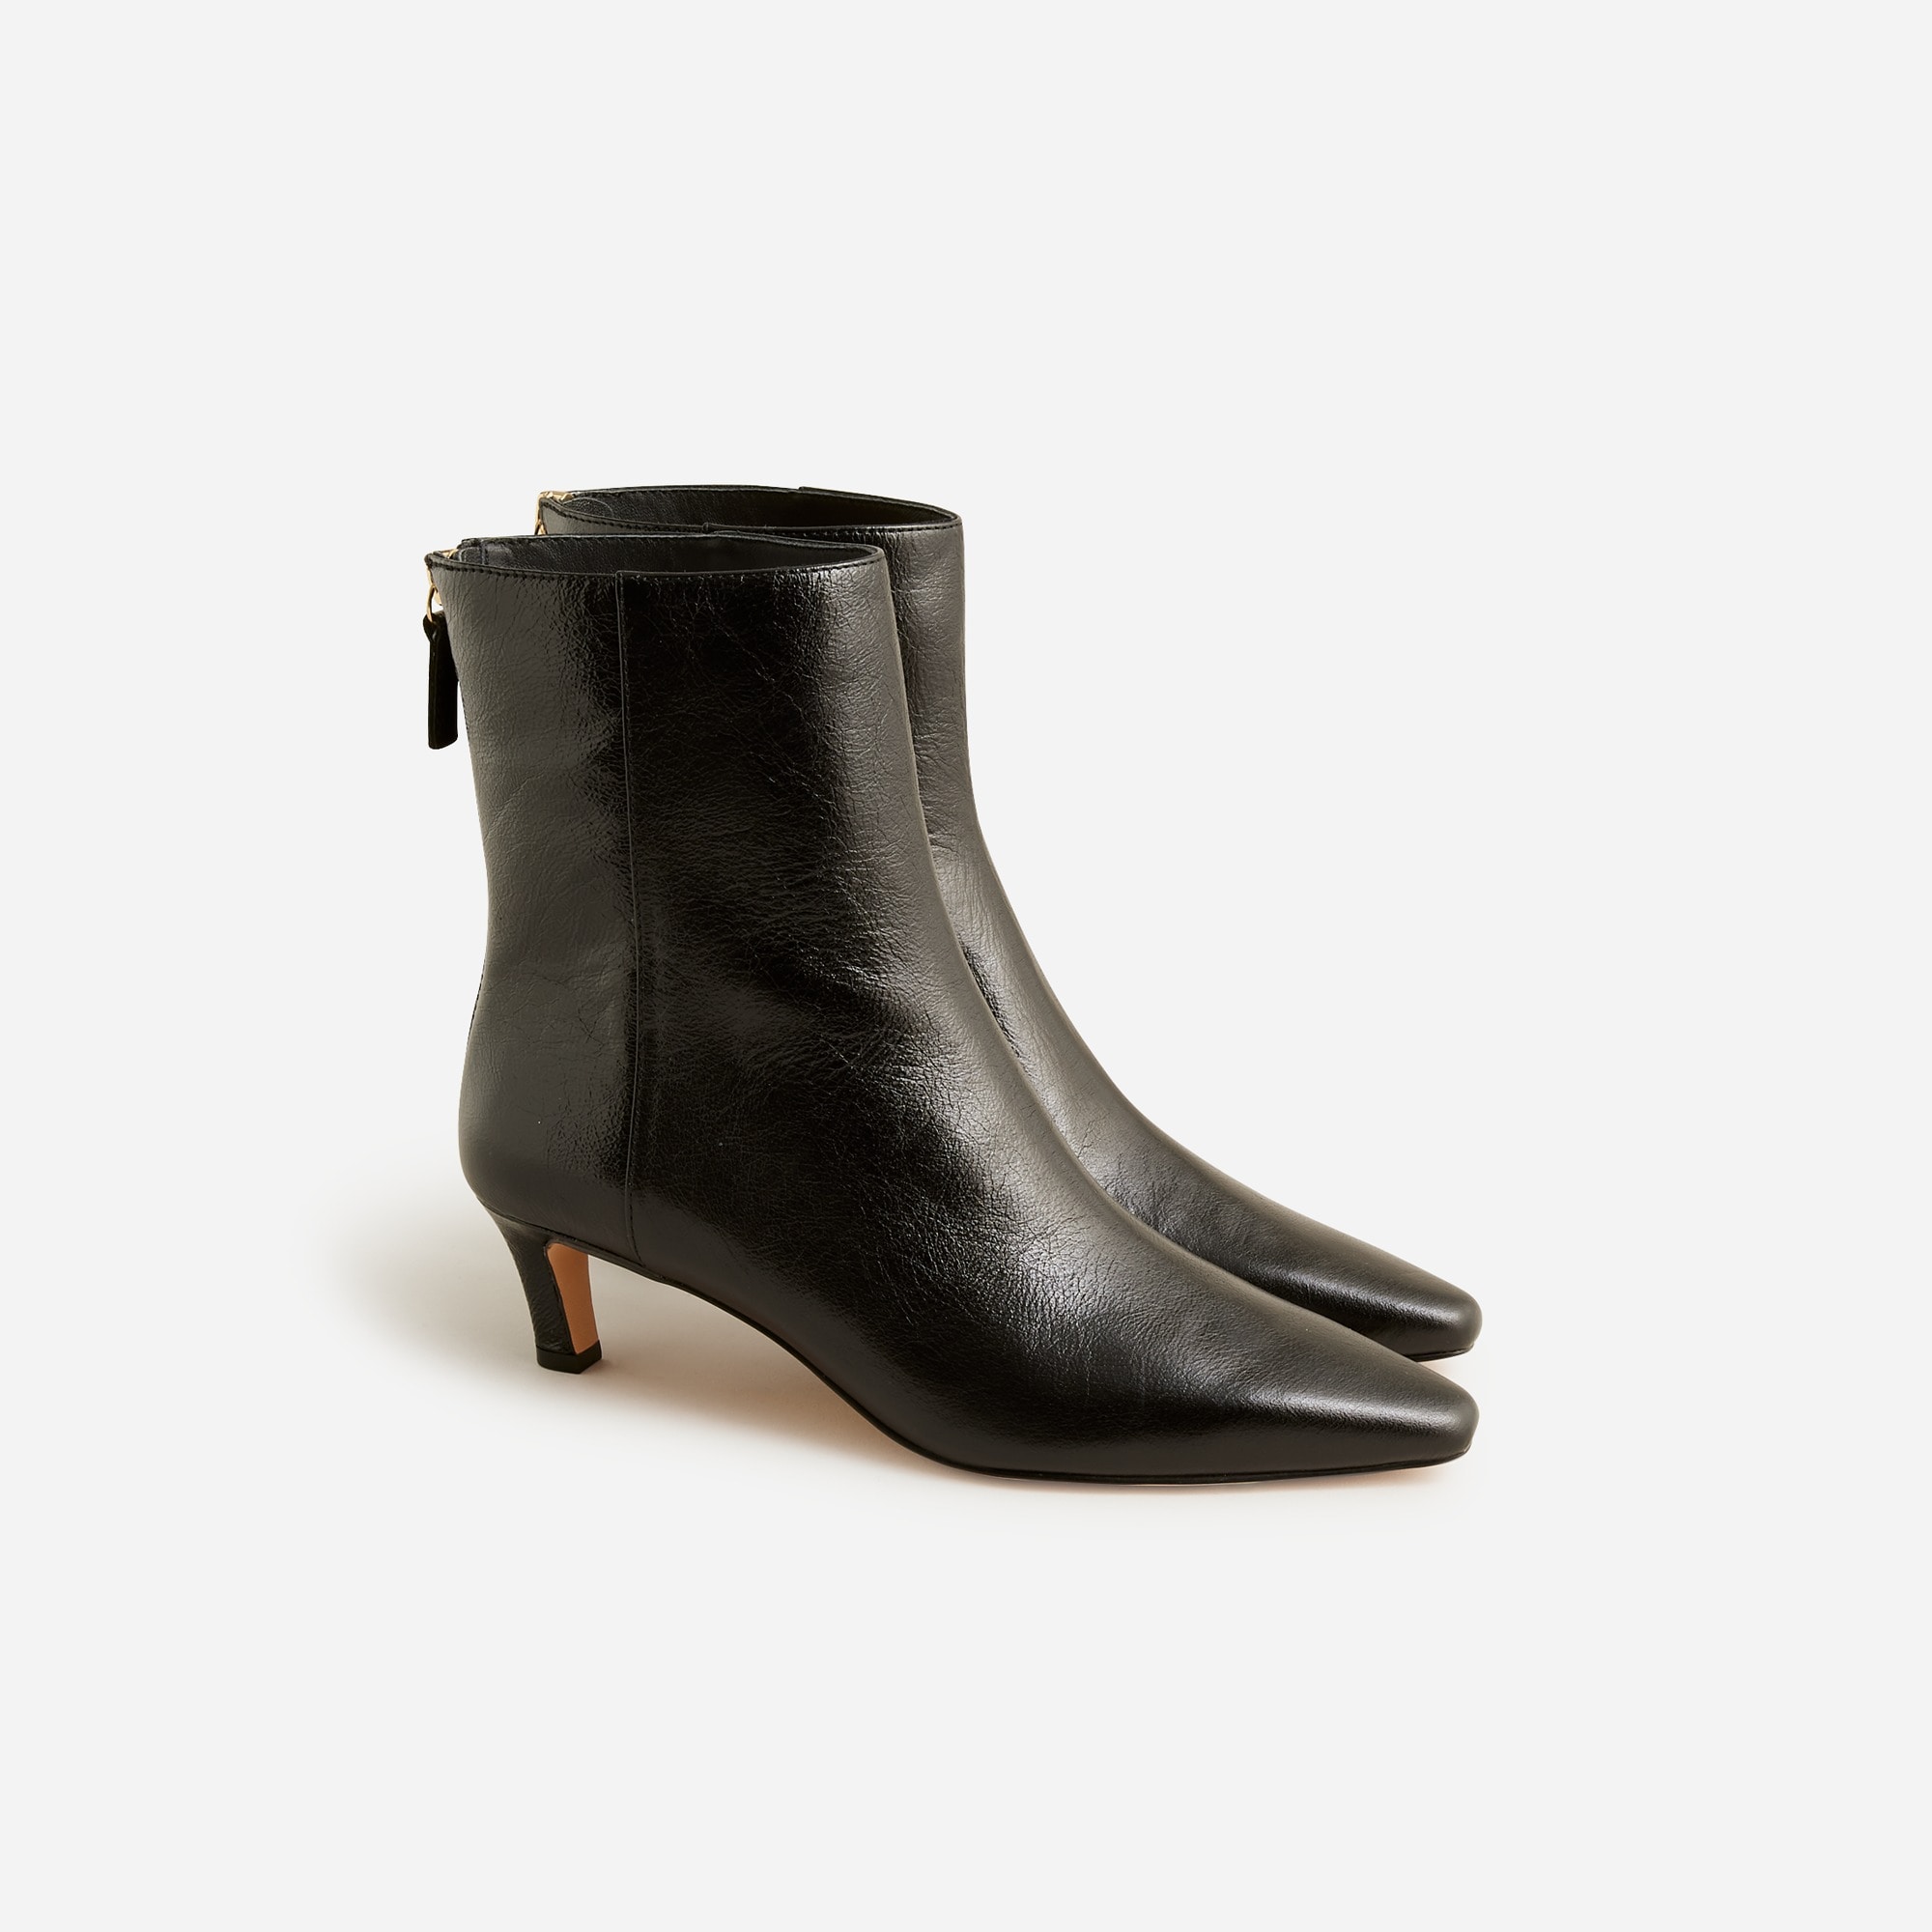  Stevie ankle boots in crinkle leather